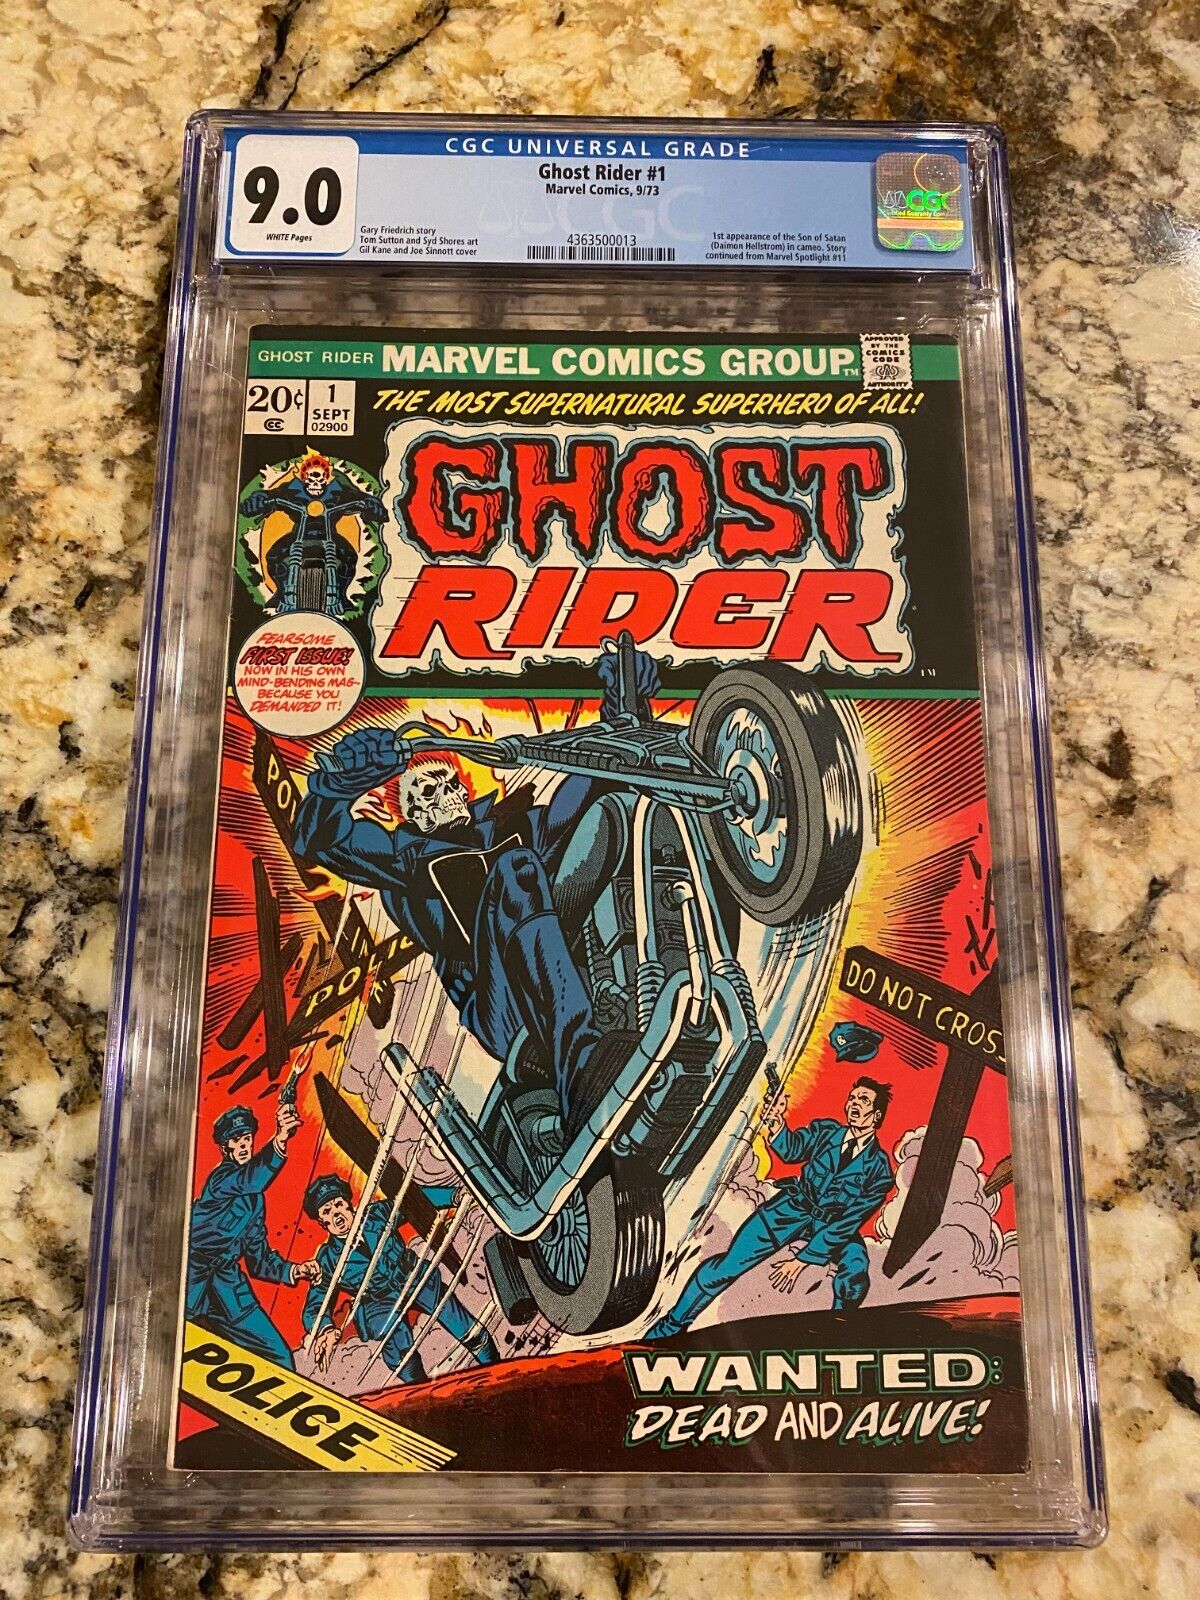 GHOST RIDER #1 CGC 9.0 WHITE PAGES 1ST SON OF SATAN HIGH END MARVEL KEY INVEST